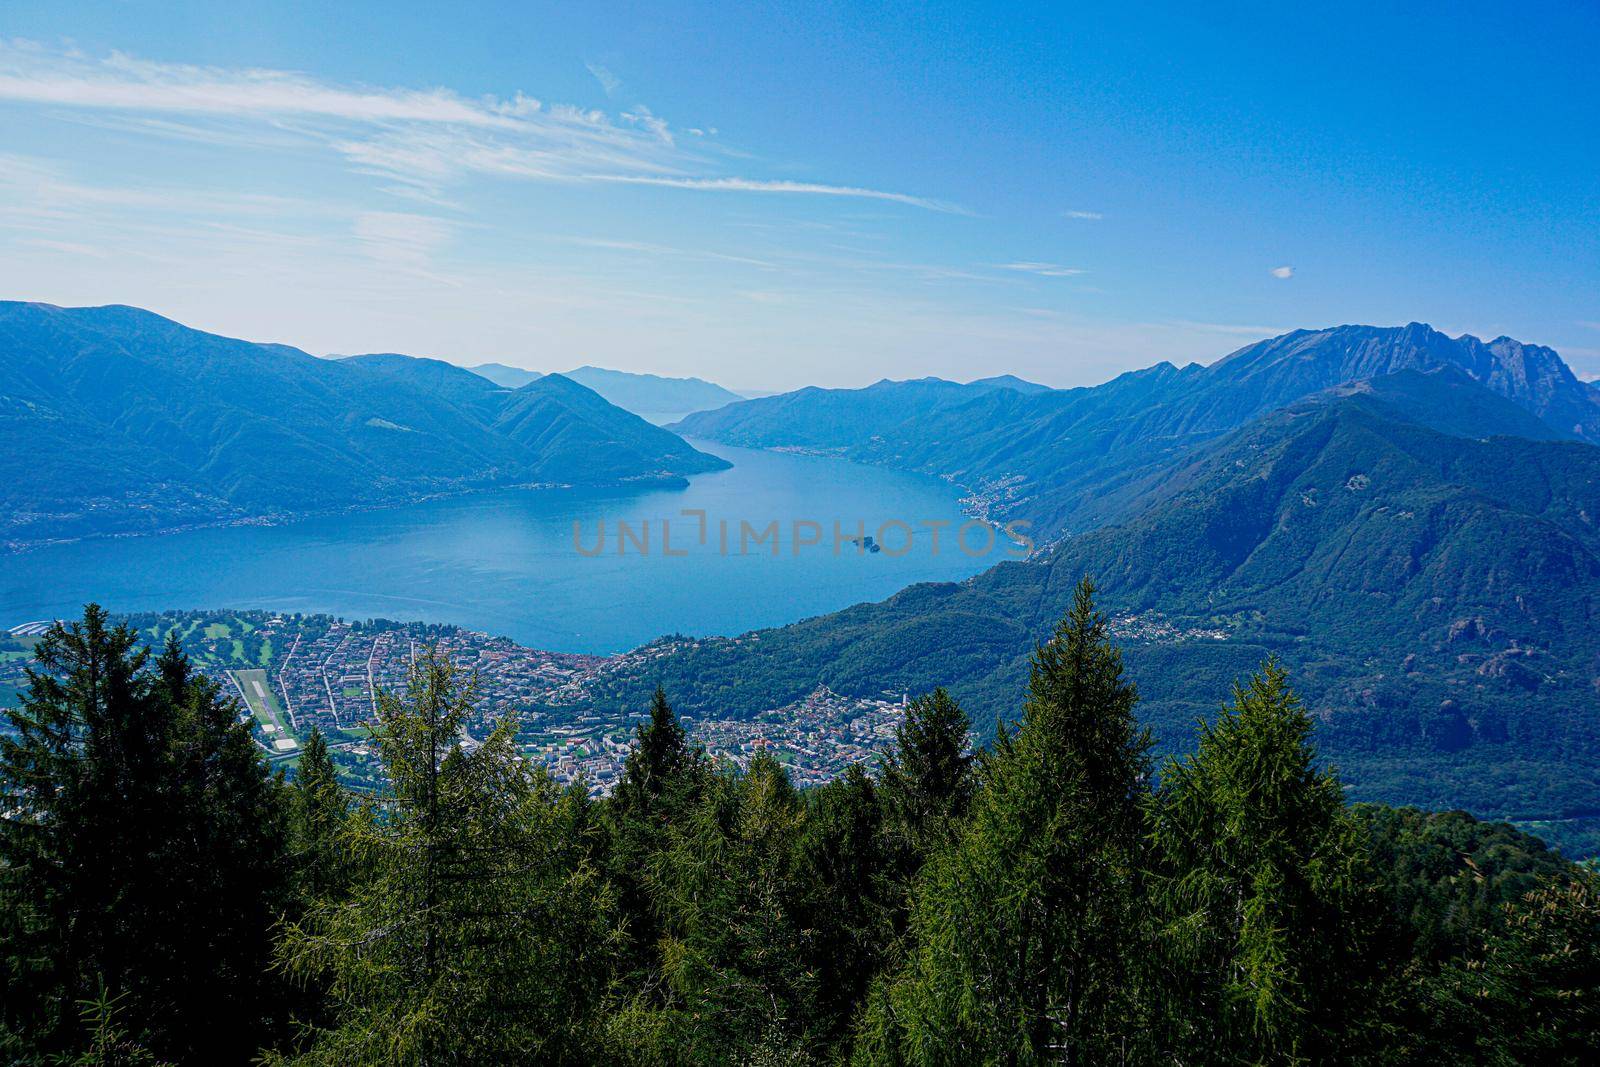 View to the city Ascona and Italy from Cardada outlook